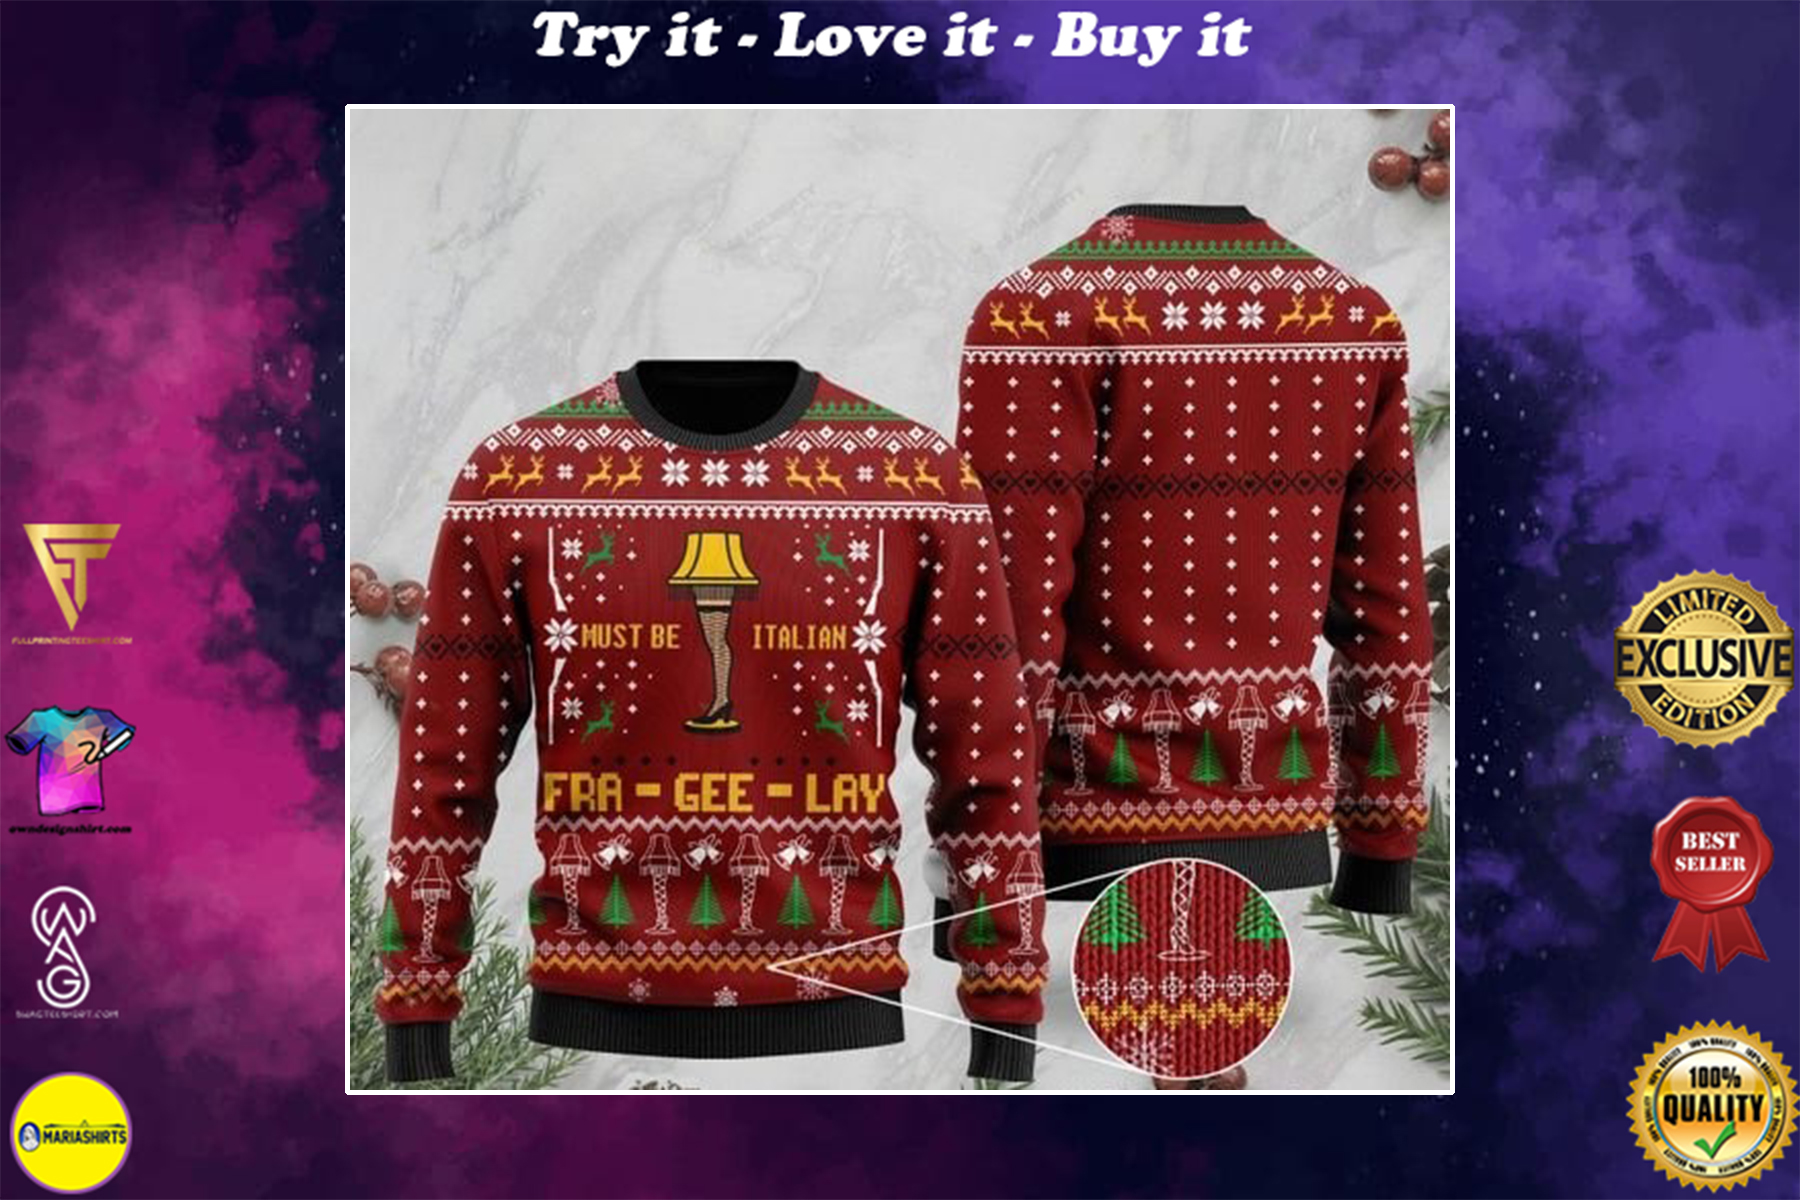 [special edition] christmas must be italian fra-gee-lay full printing ugly sweater – maria